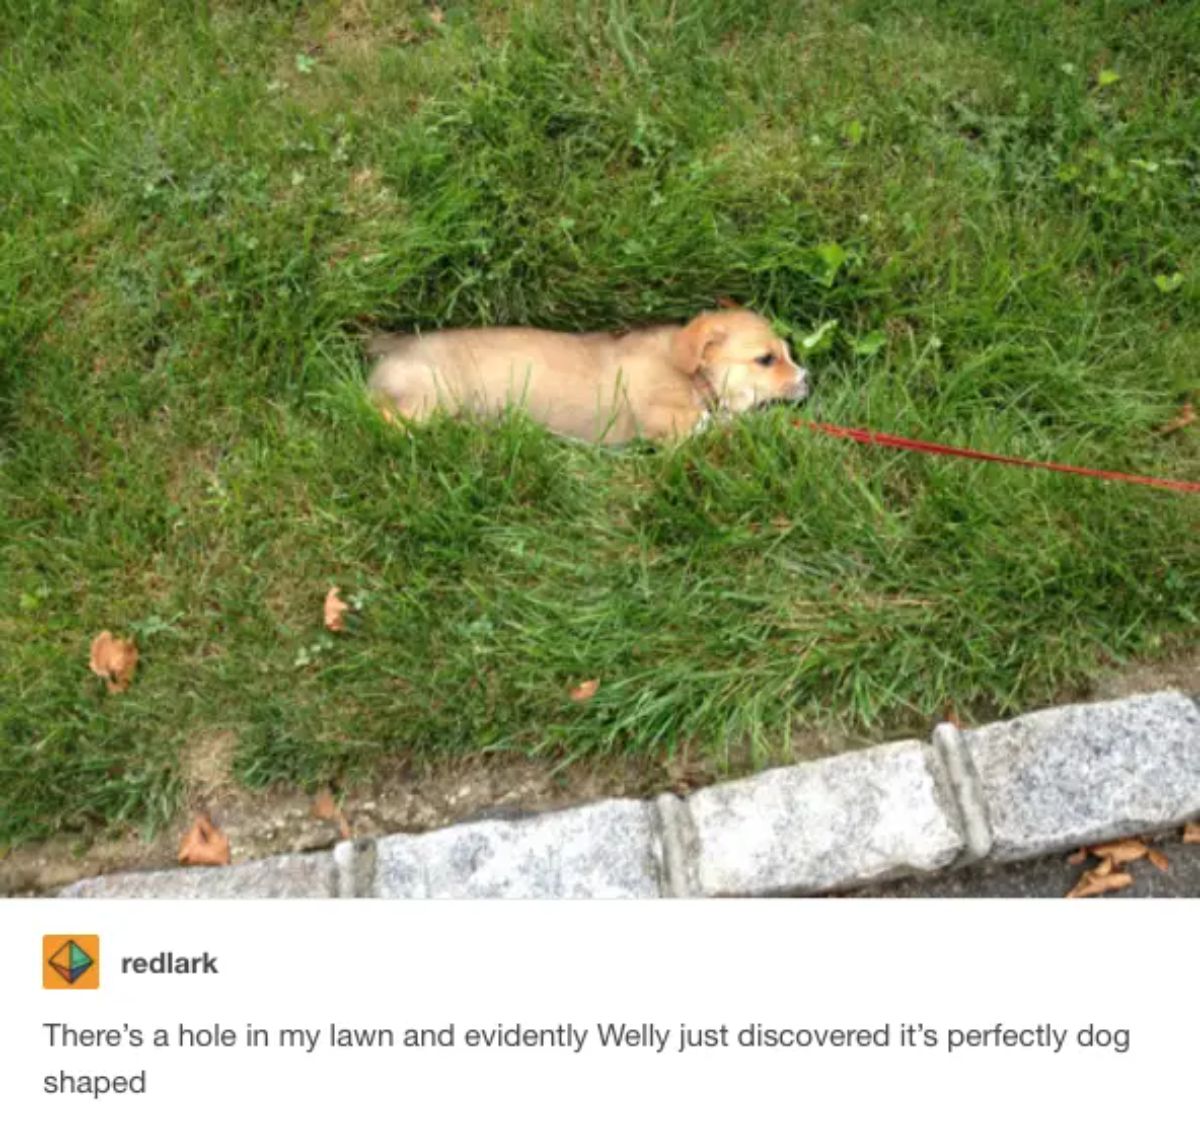 golden retriever puppy in a hole in the grass with caption saying the puppy has discovered the hole is perfectly dog-shaped